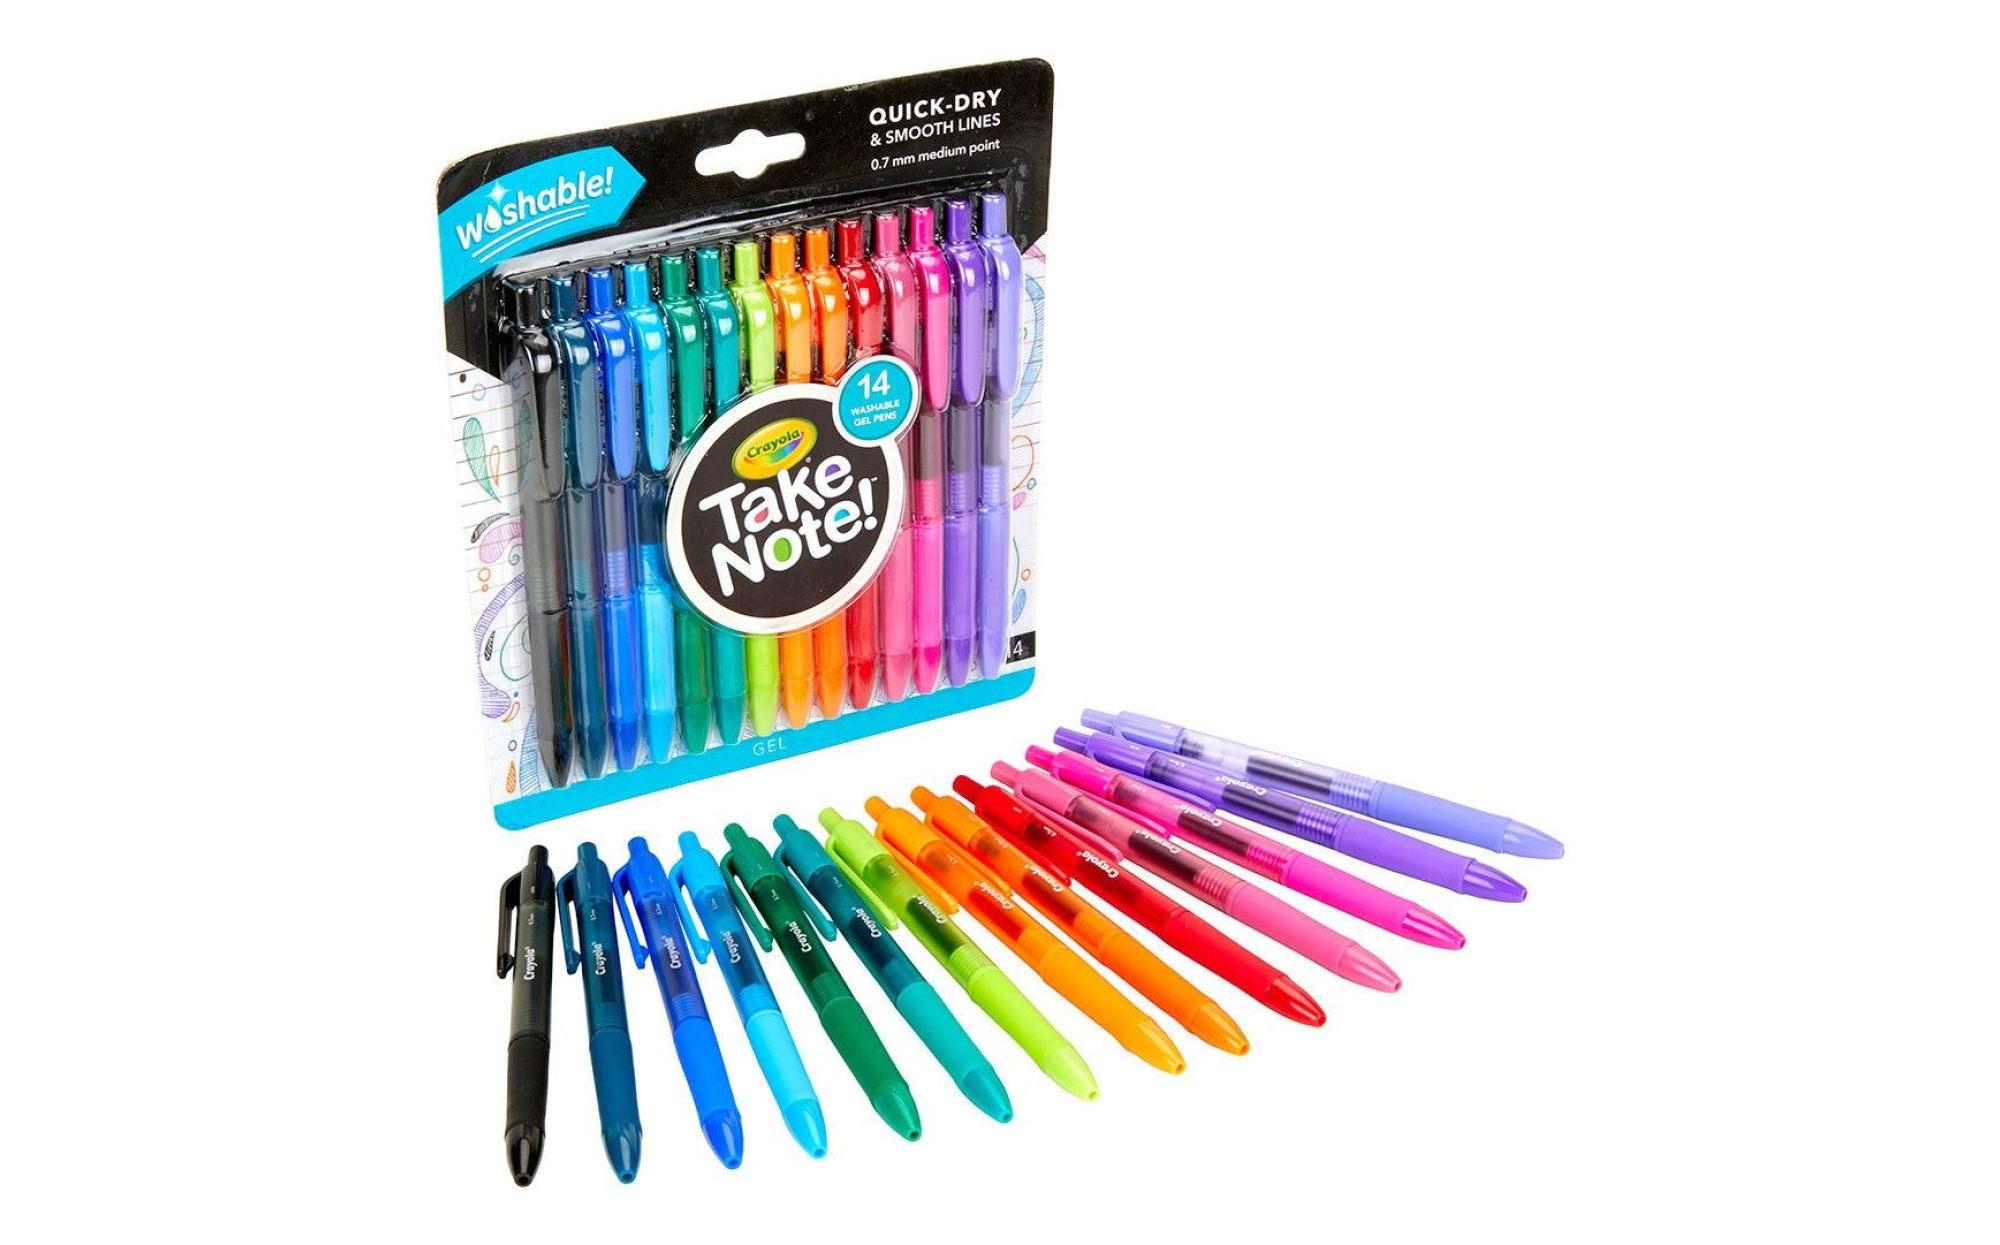 Crayola Take Note Permanent Markers 12 ct